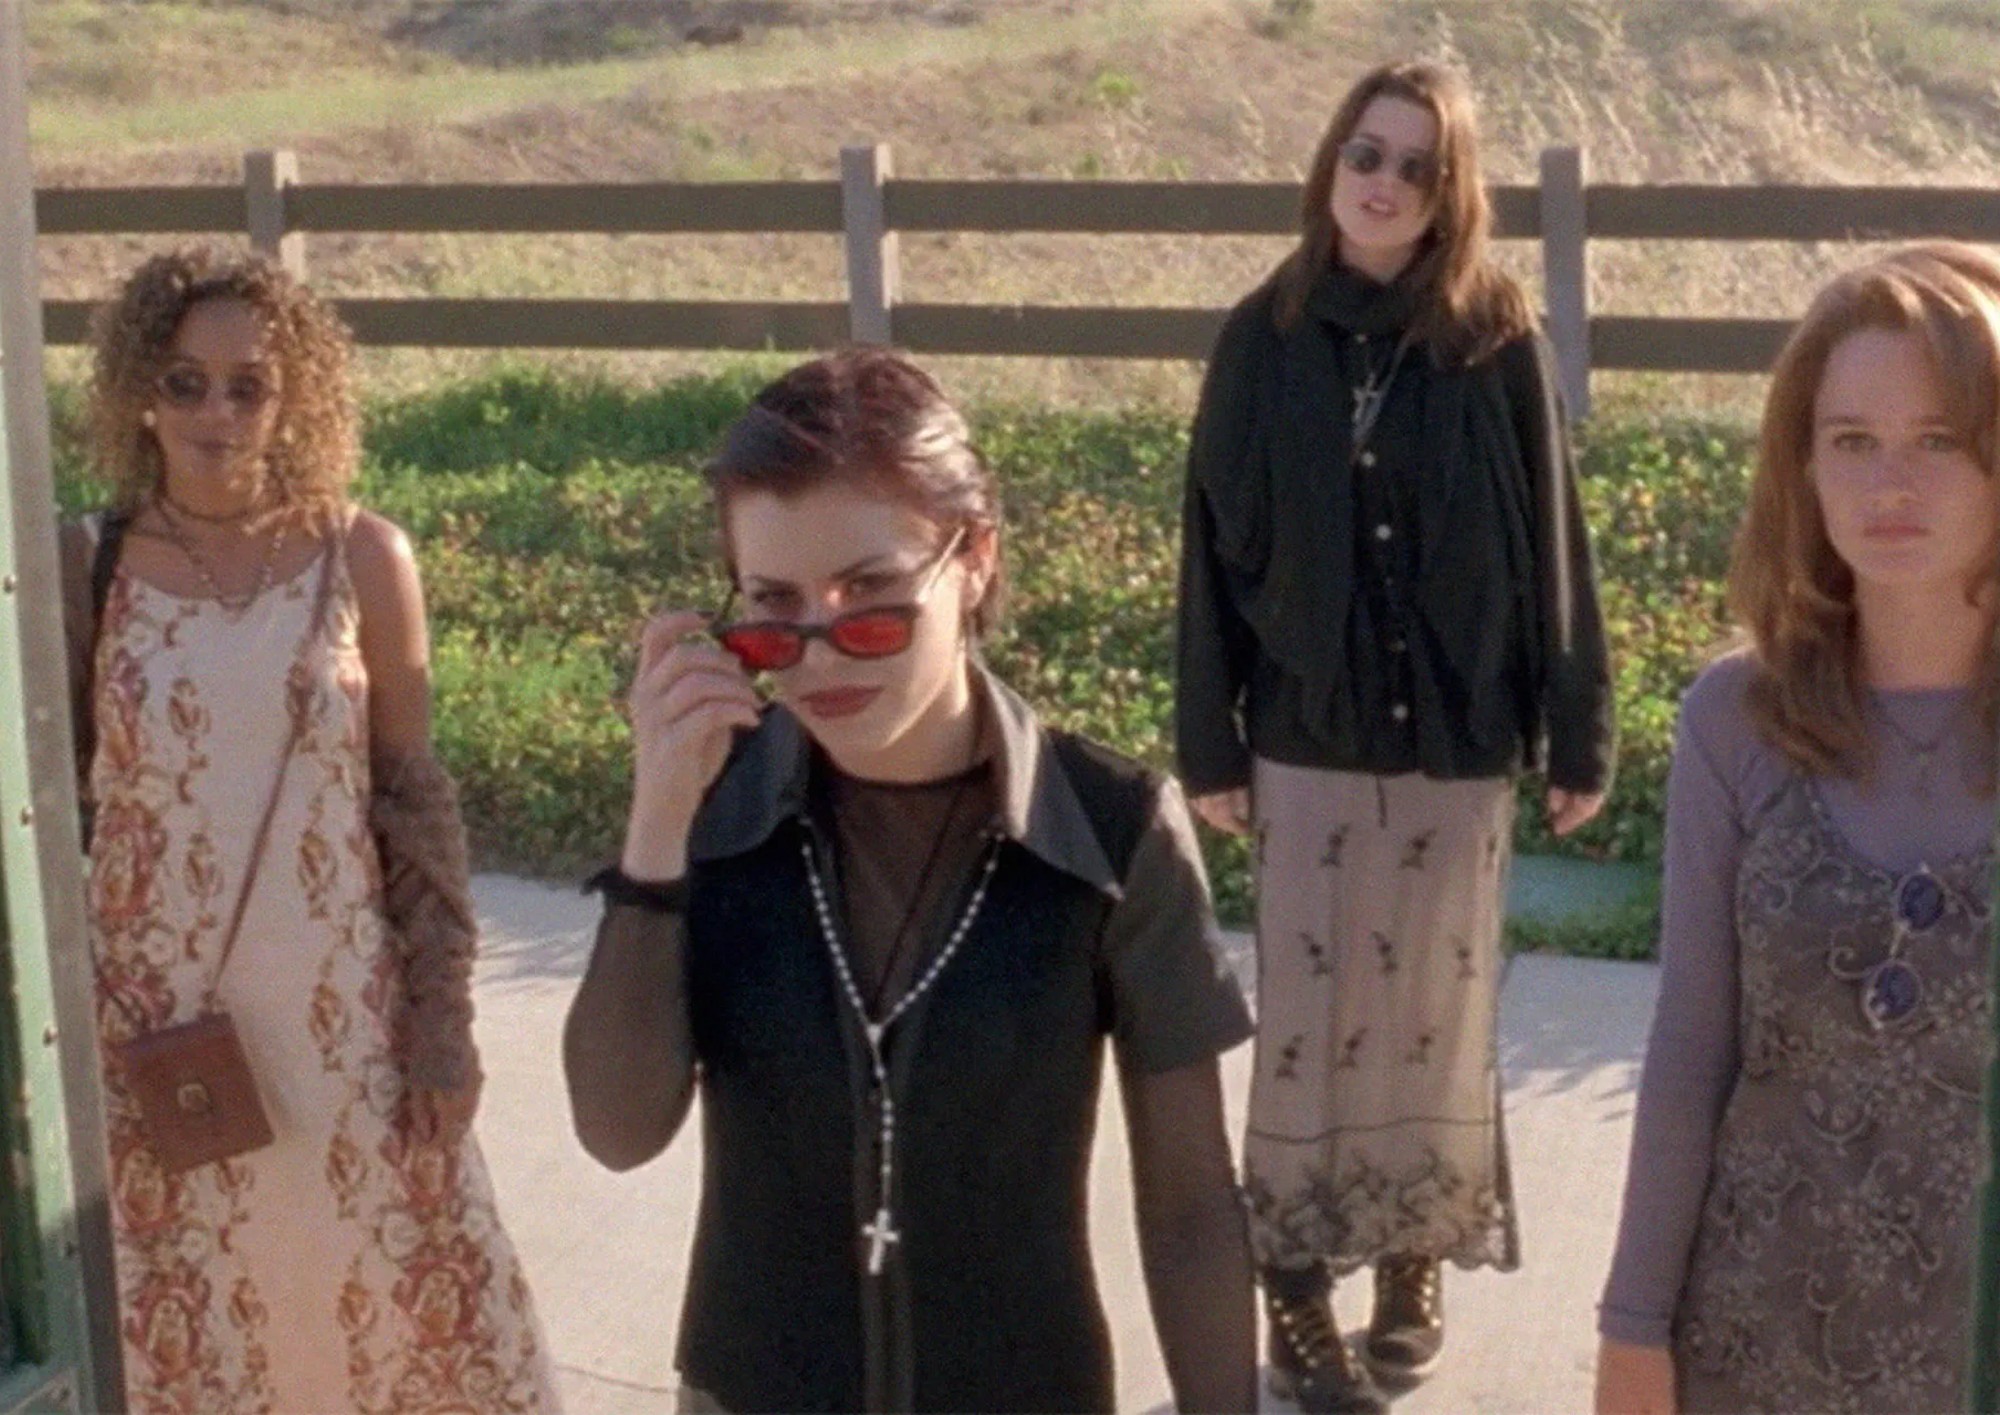 Scene from the motion picture The Craft